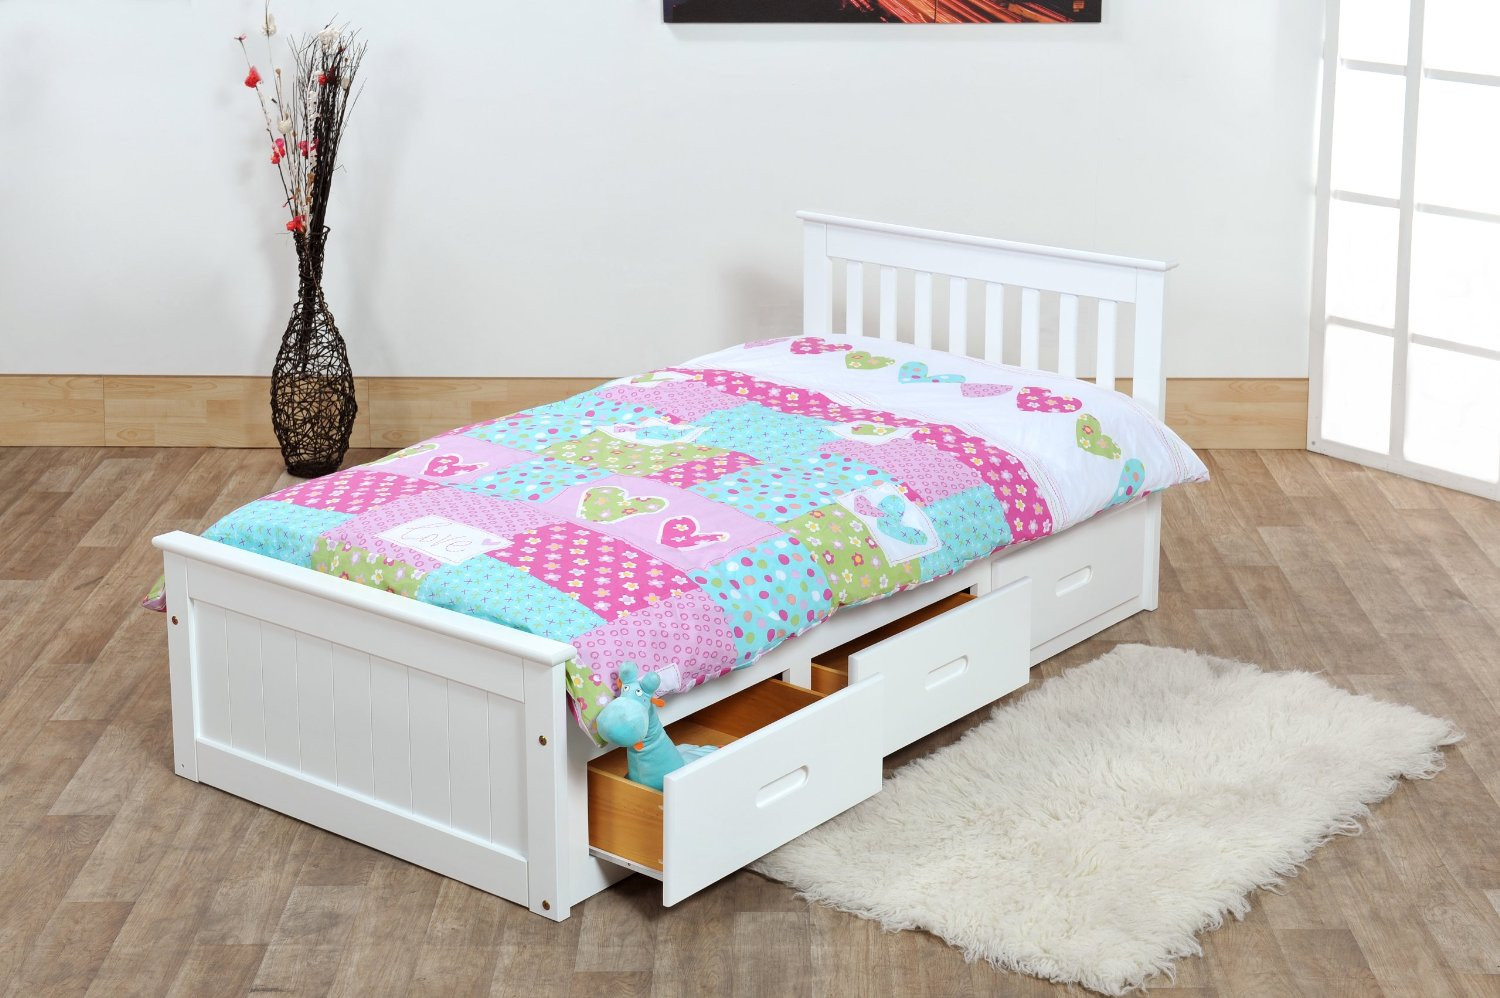 Kids Beds With Storage
 Tips To Buy Kids Bed With Storage MidCityEast